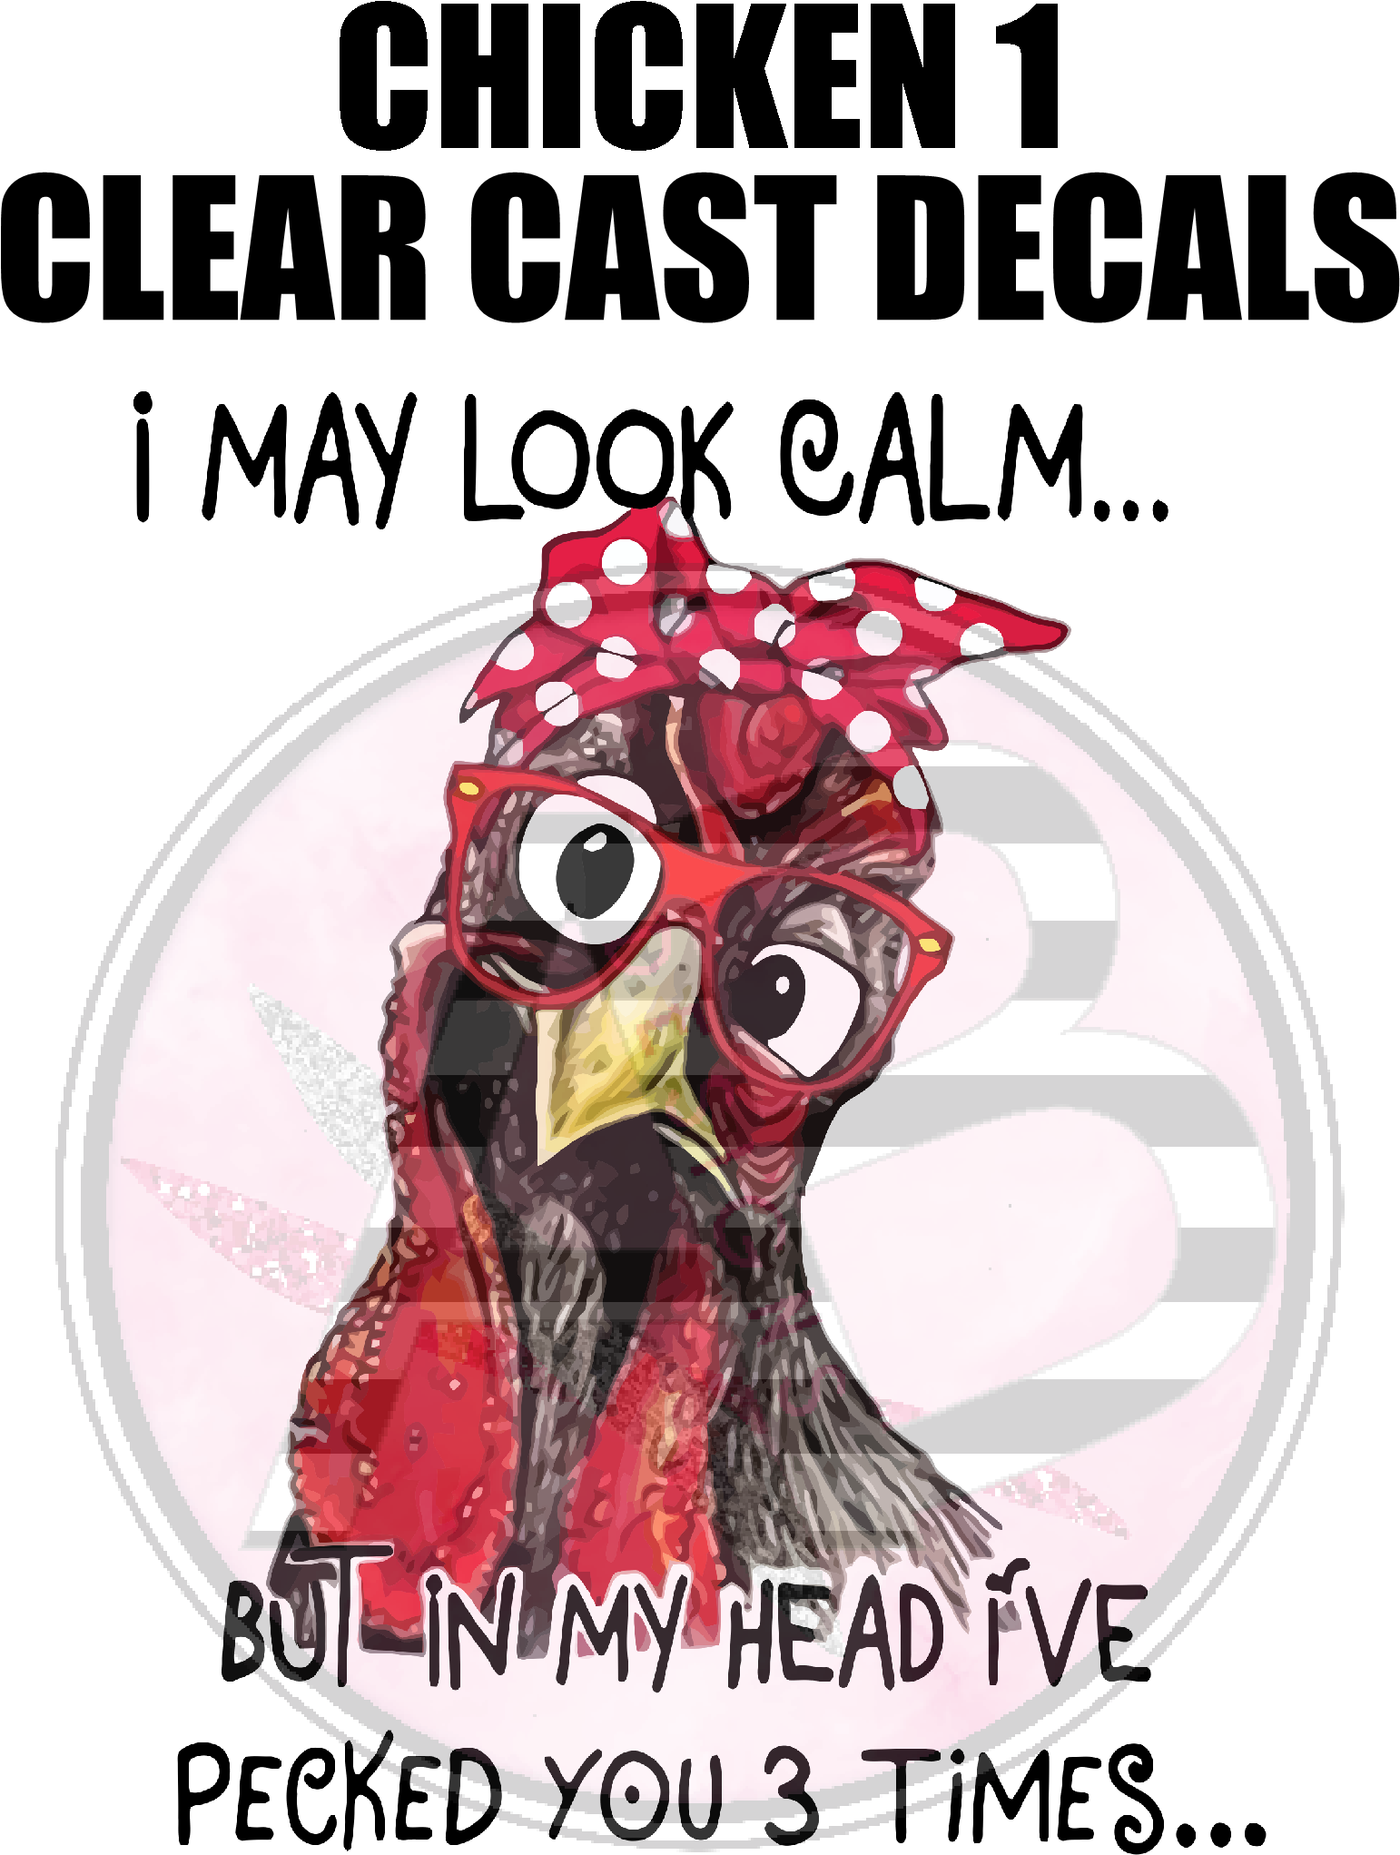 Chicken 1 - Clear Cast Decal